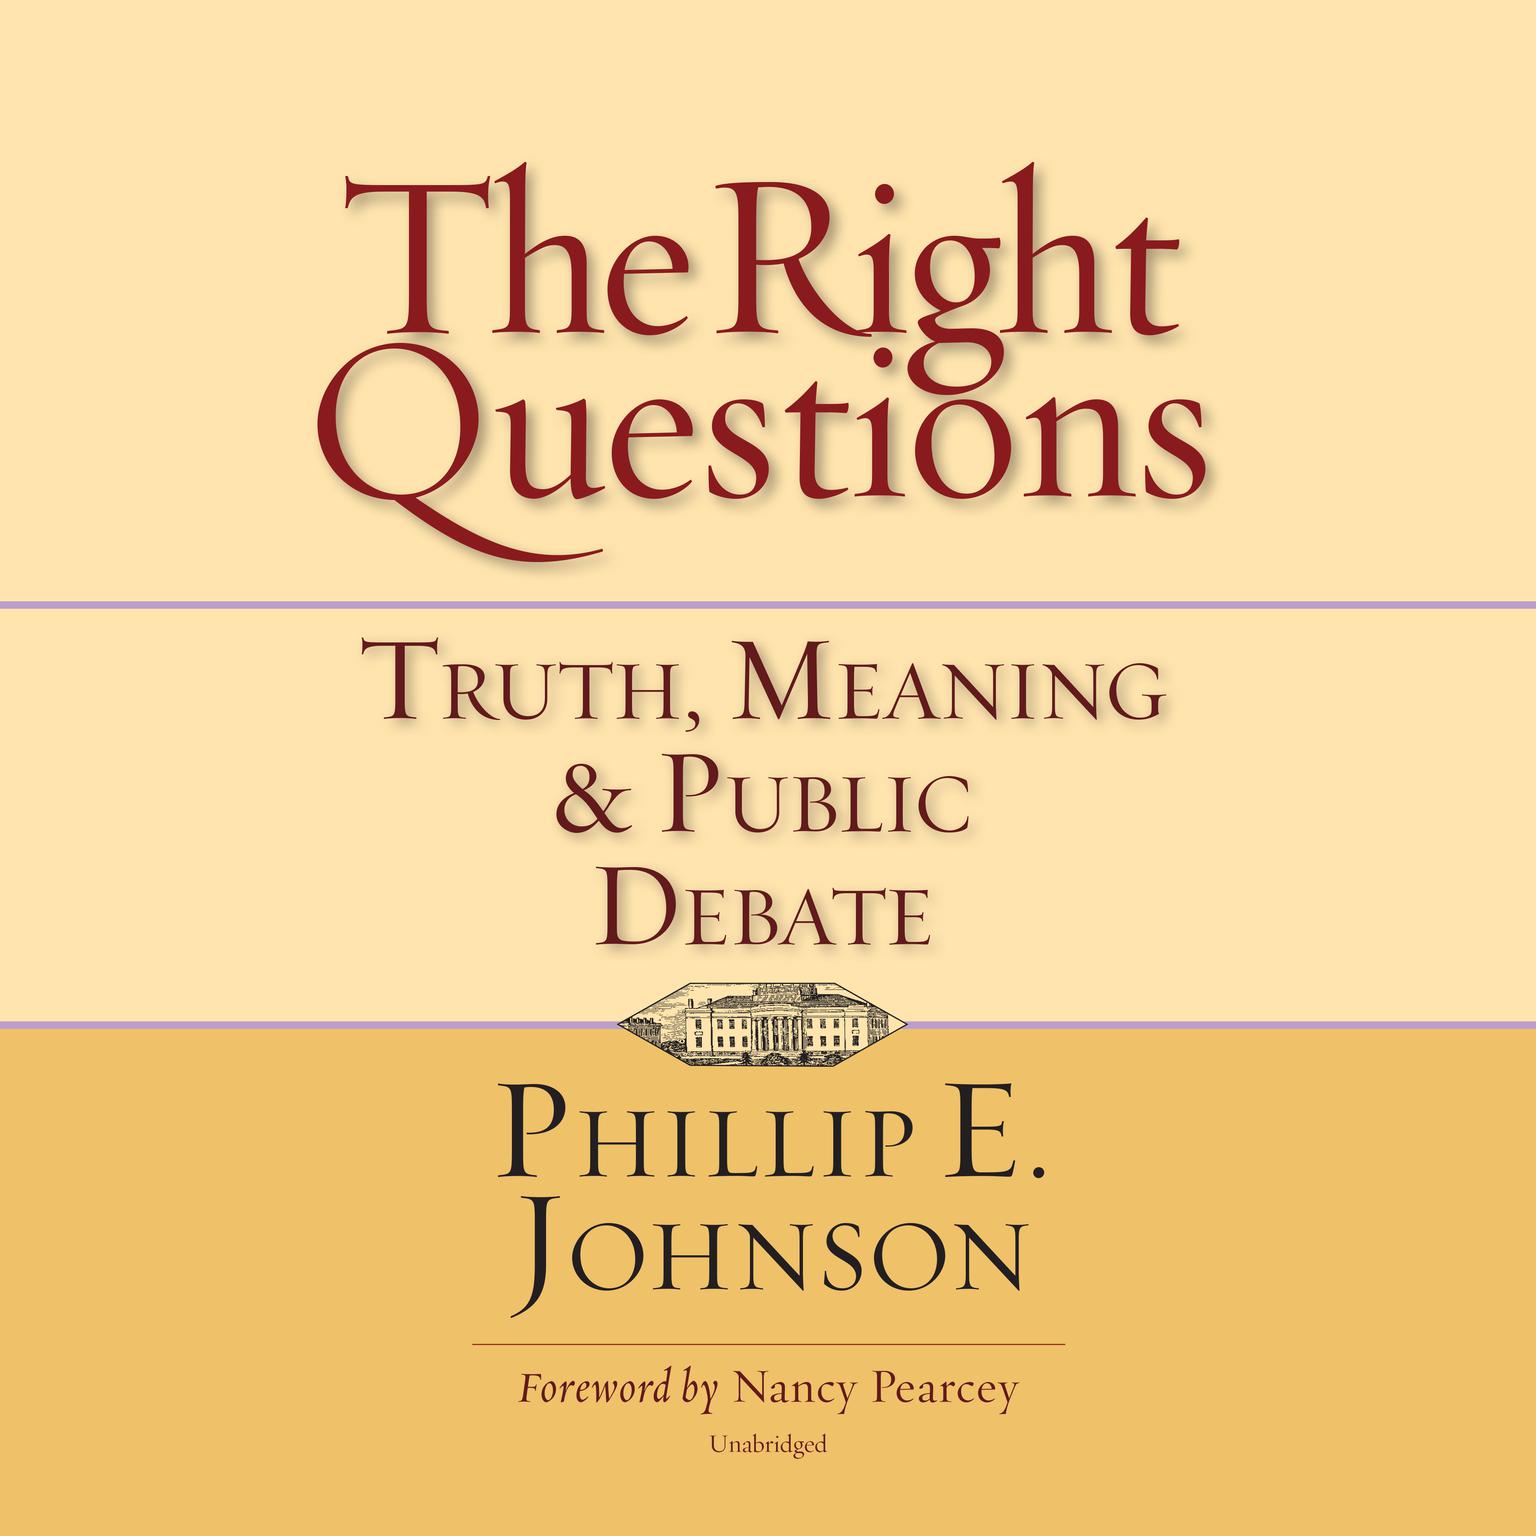 The Right Questions: Truth, Meaning & Public Debate Audiobook, by Phillip E. Johnson